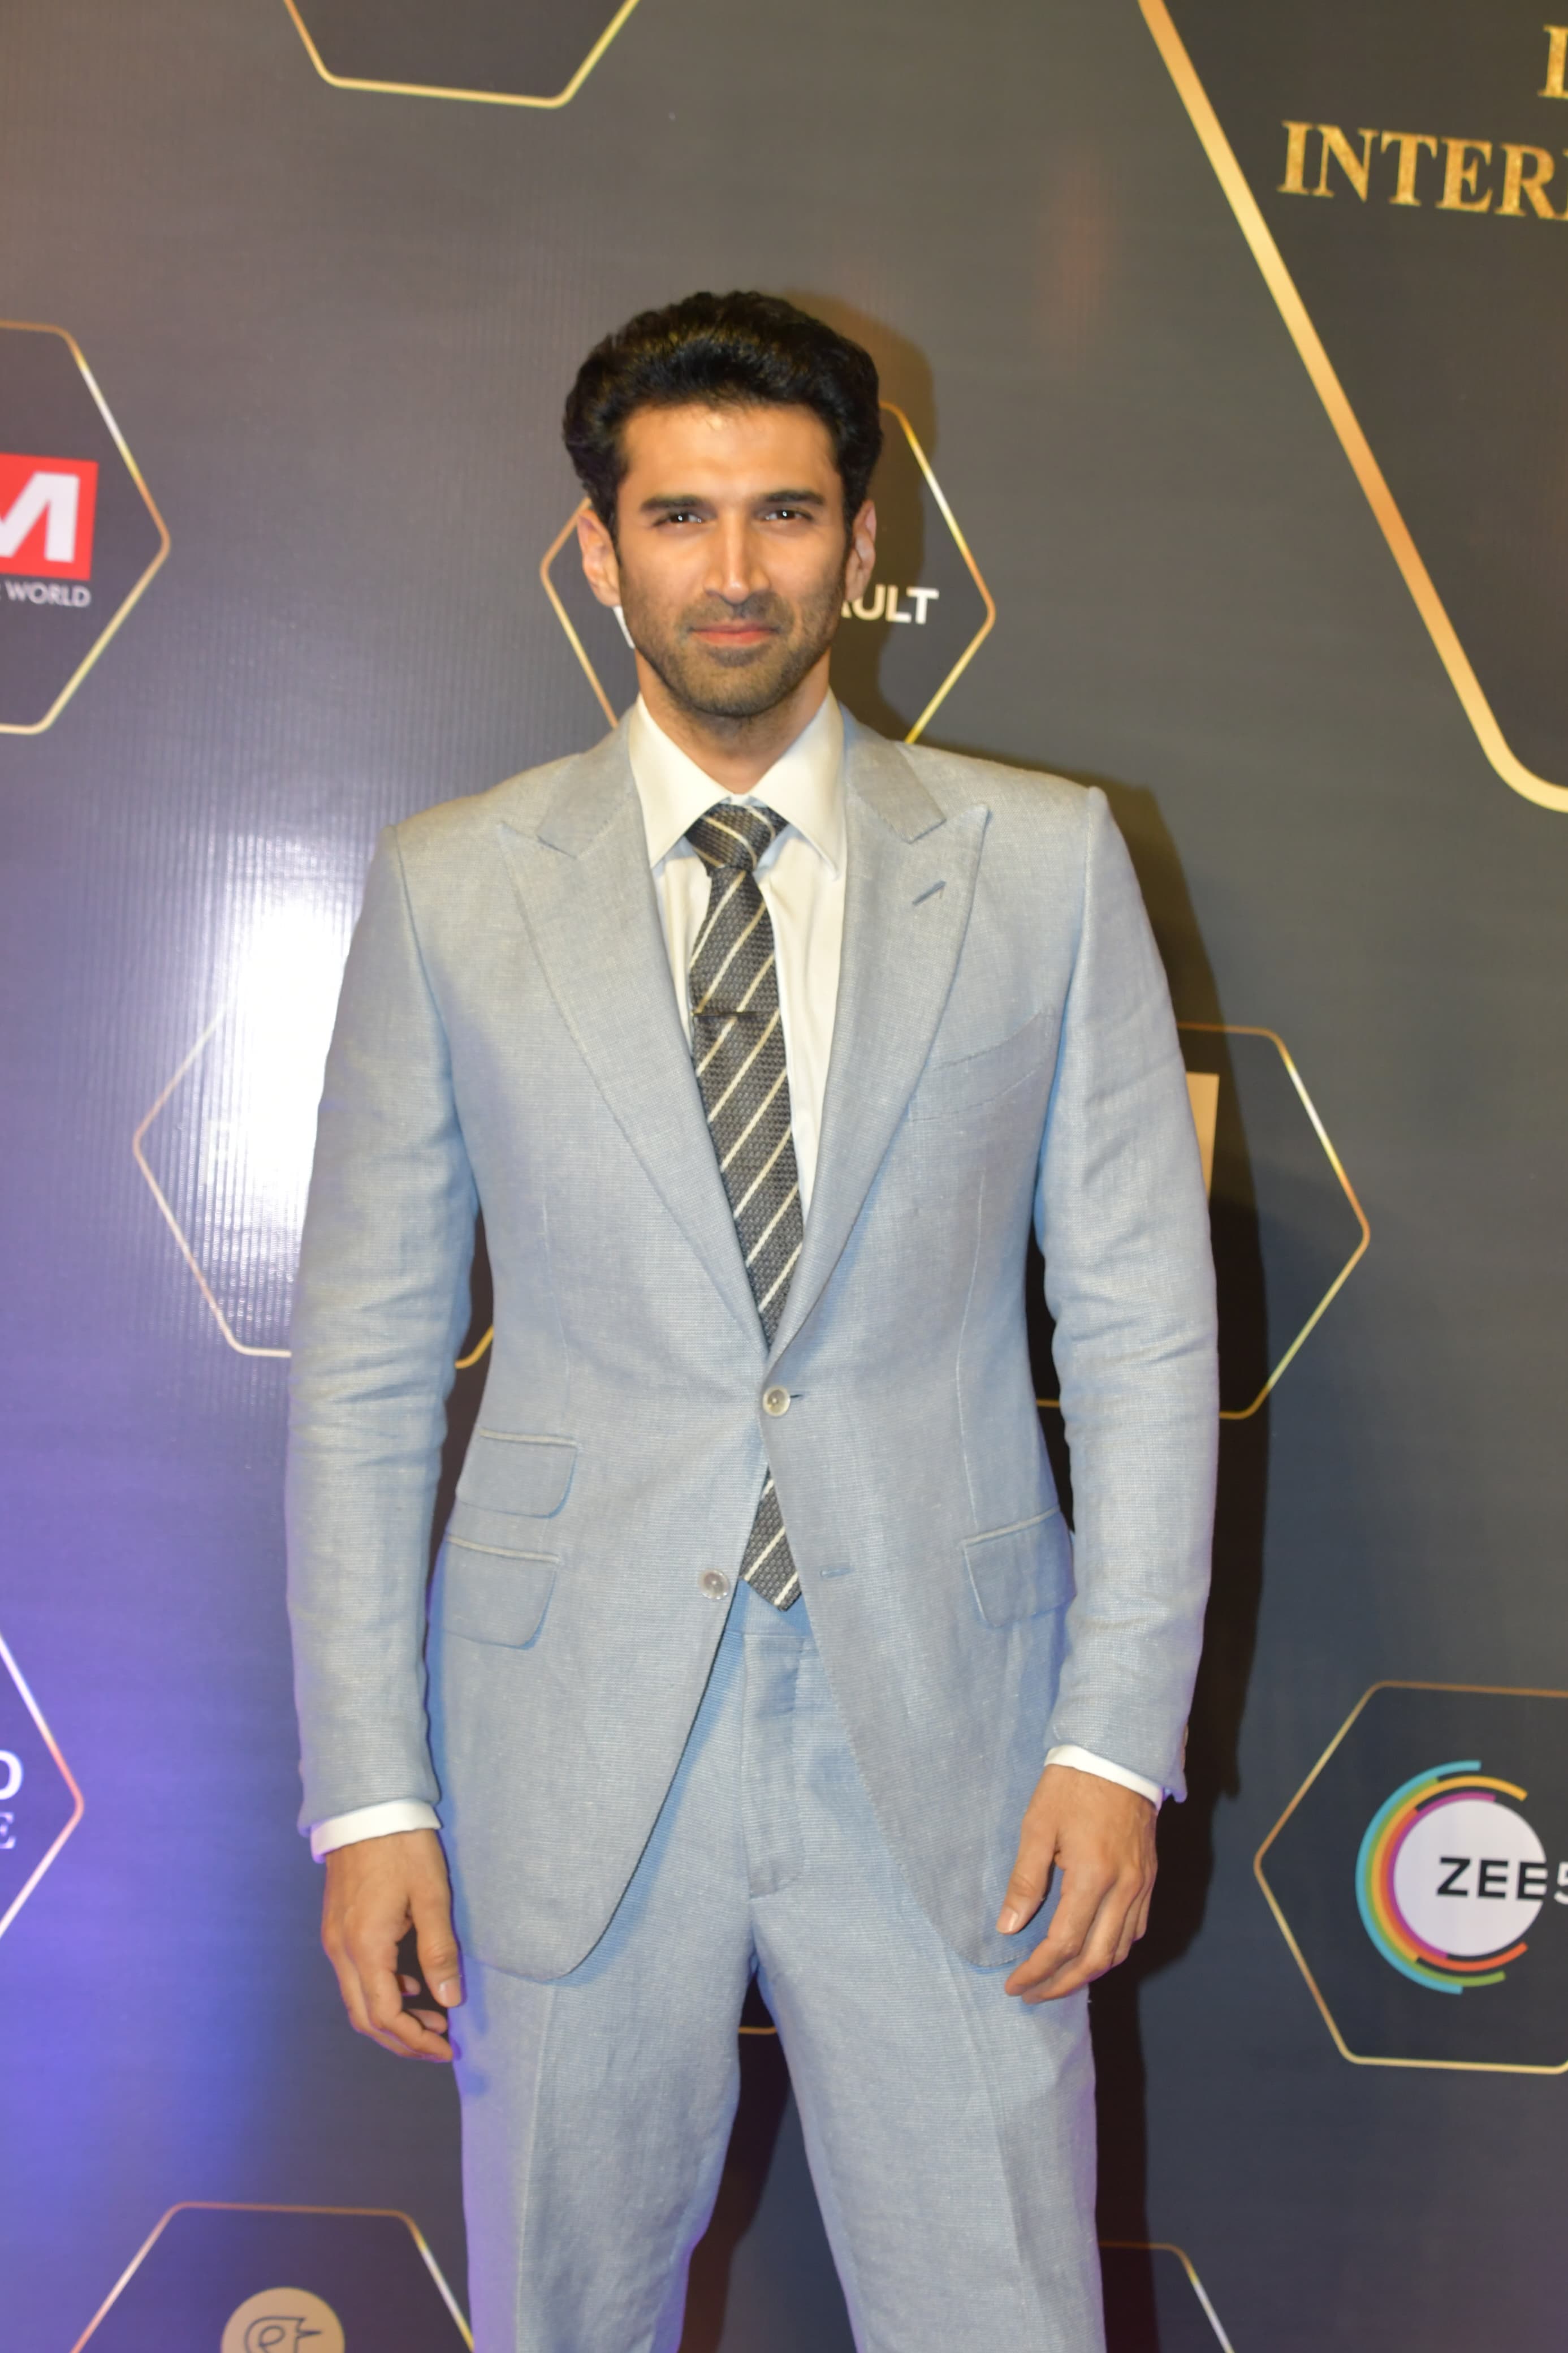 Aditya Roy Kapur made a breathtaking appearance at the event donning a stylish grey suit. What caught everyone's attention was the uncanny resemblance between the suits worn by Aditya and Tom Hiddleston, who had worn a similar suit just a day before. Aditya's attire was well-tailored and perfectly fitted, highlighting his sharp features.